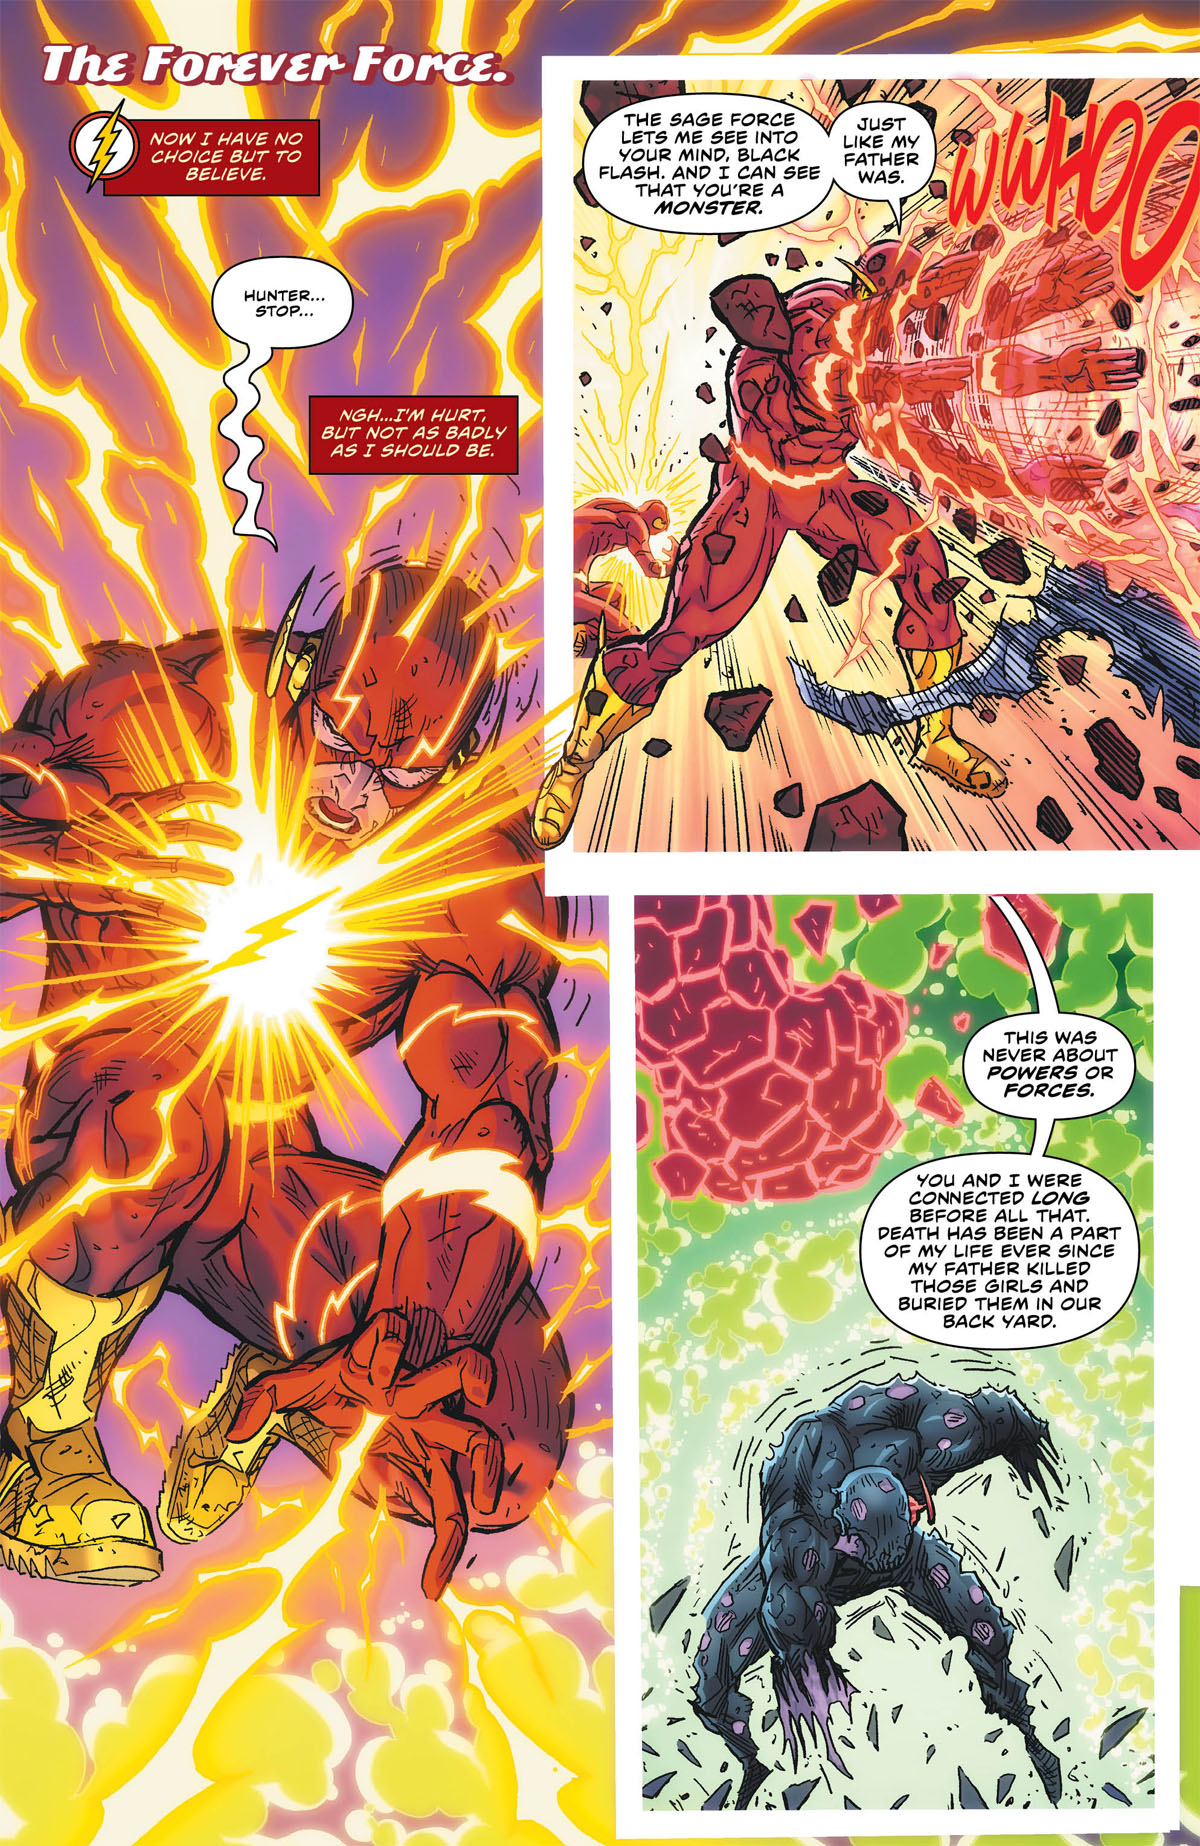 The Flash #81 page 2